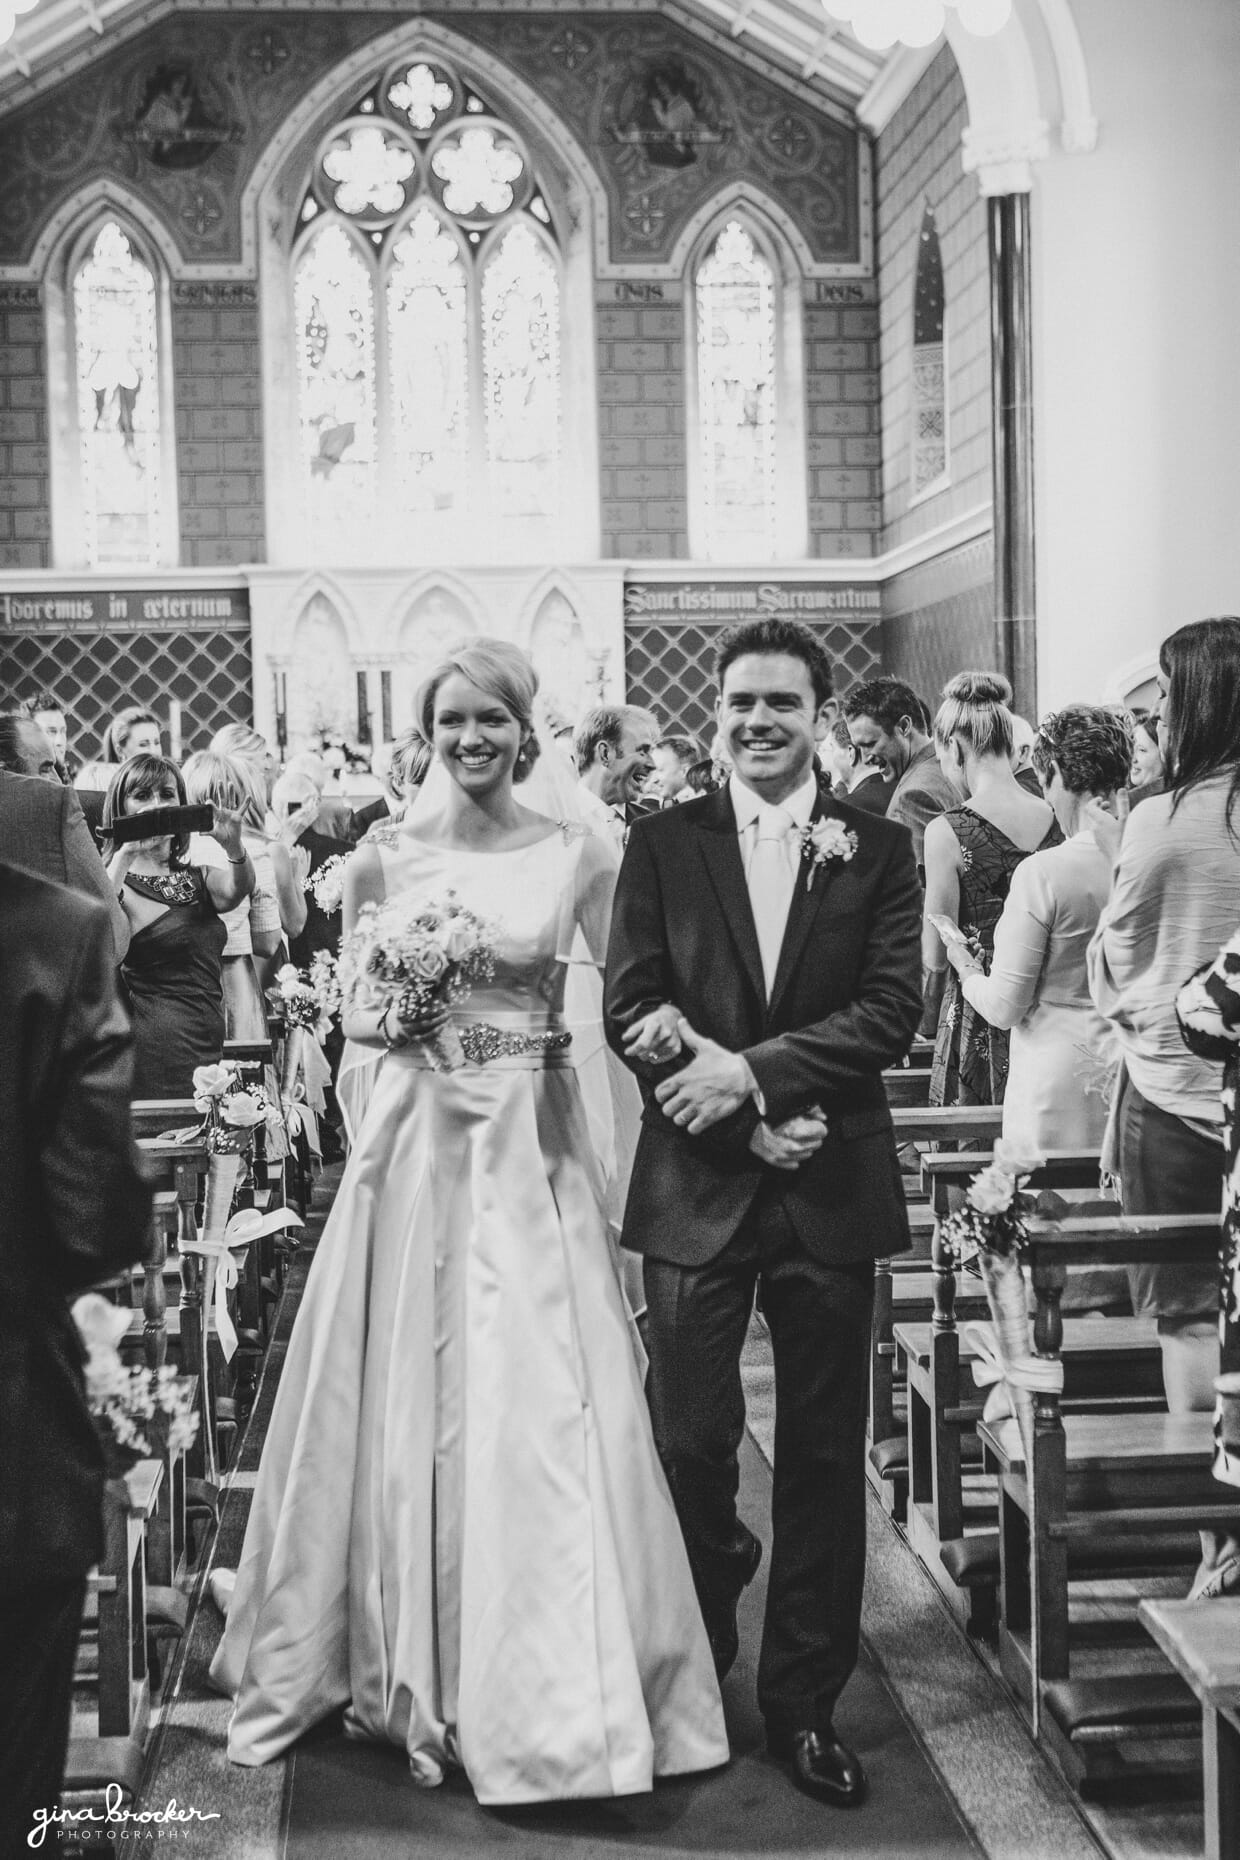 The bride and groom smile as they walk down the aisle after their wedding ceremony in a beautiful church